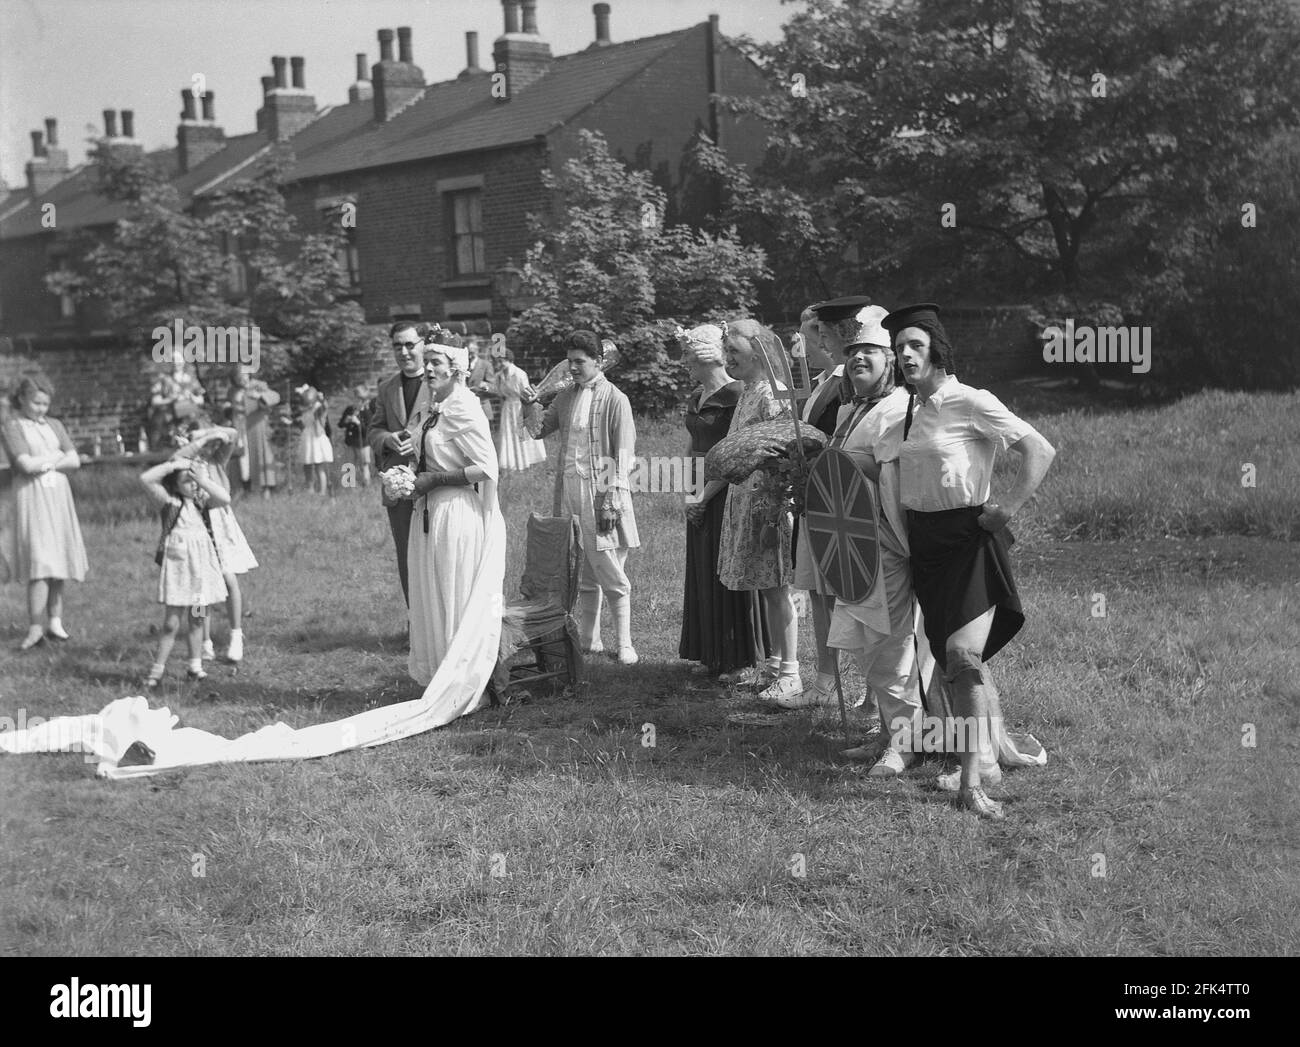 1950s, historical, on a piece of land at the end of terrace of victorian houses, a group of local men - 'the Heavy Gang' dressed in womens clothes and fancy dress standing for a photo before a performance for the 'May Day' festival, England, UK. The amateur actors here are in differen costumes, including Guinevere, the legendary Queen of King Arthur. May Day was an ancient tradition which celebrated the arrival of Spring and Summer and performers would  dress up and re-enact old folklore and stories with dancing around a tall wooden pole, a maypole, a popular activity. Stock Photo